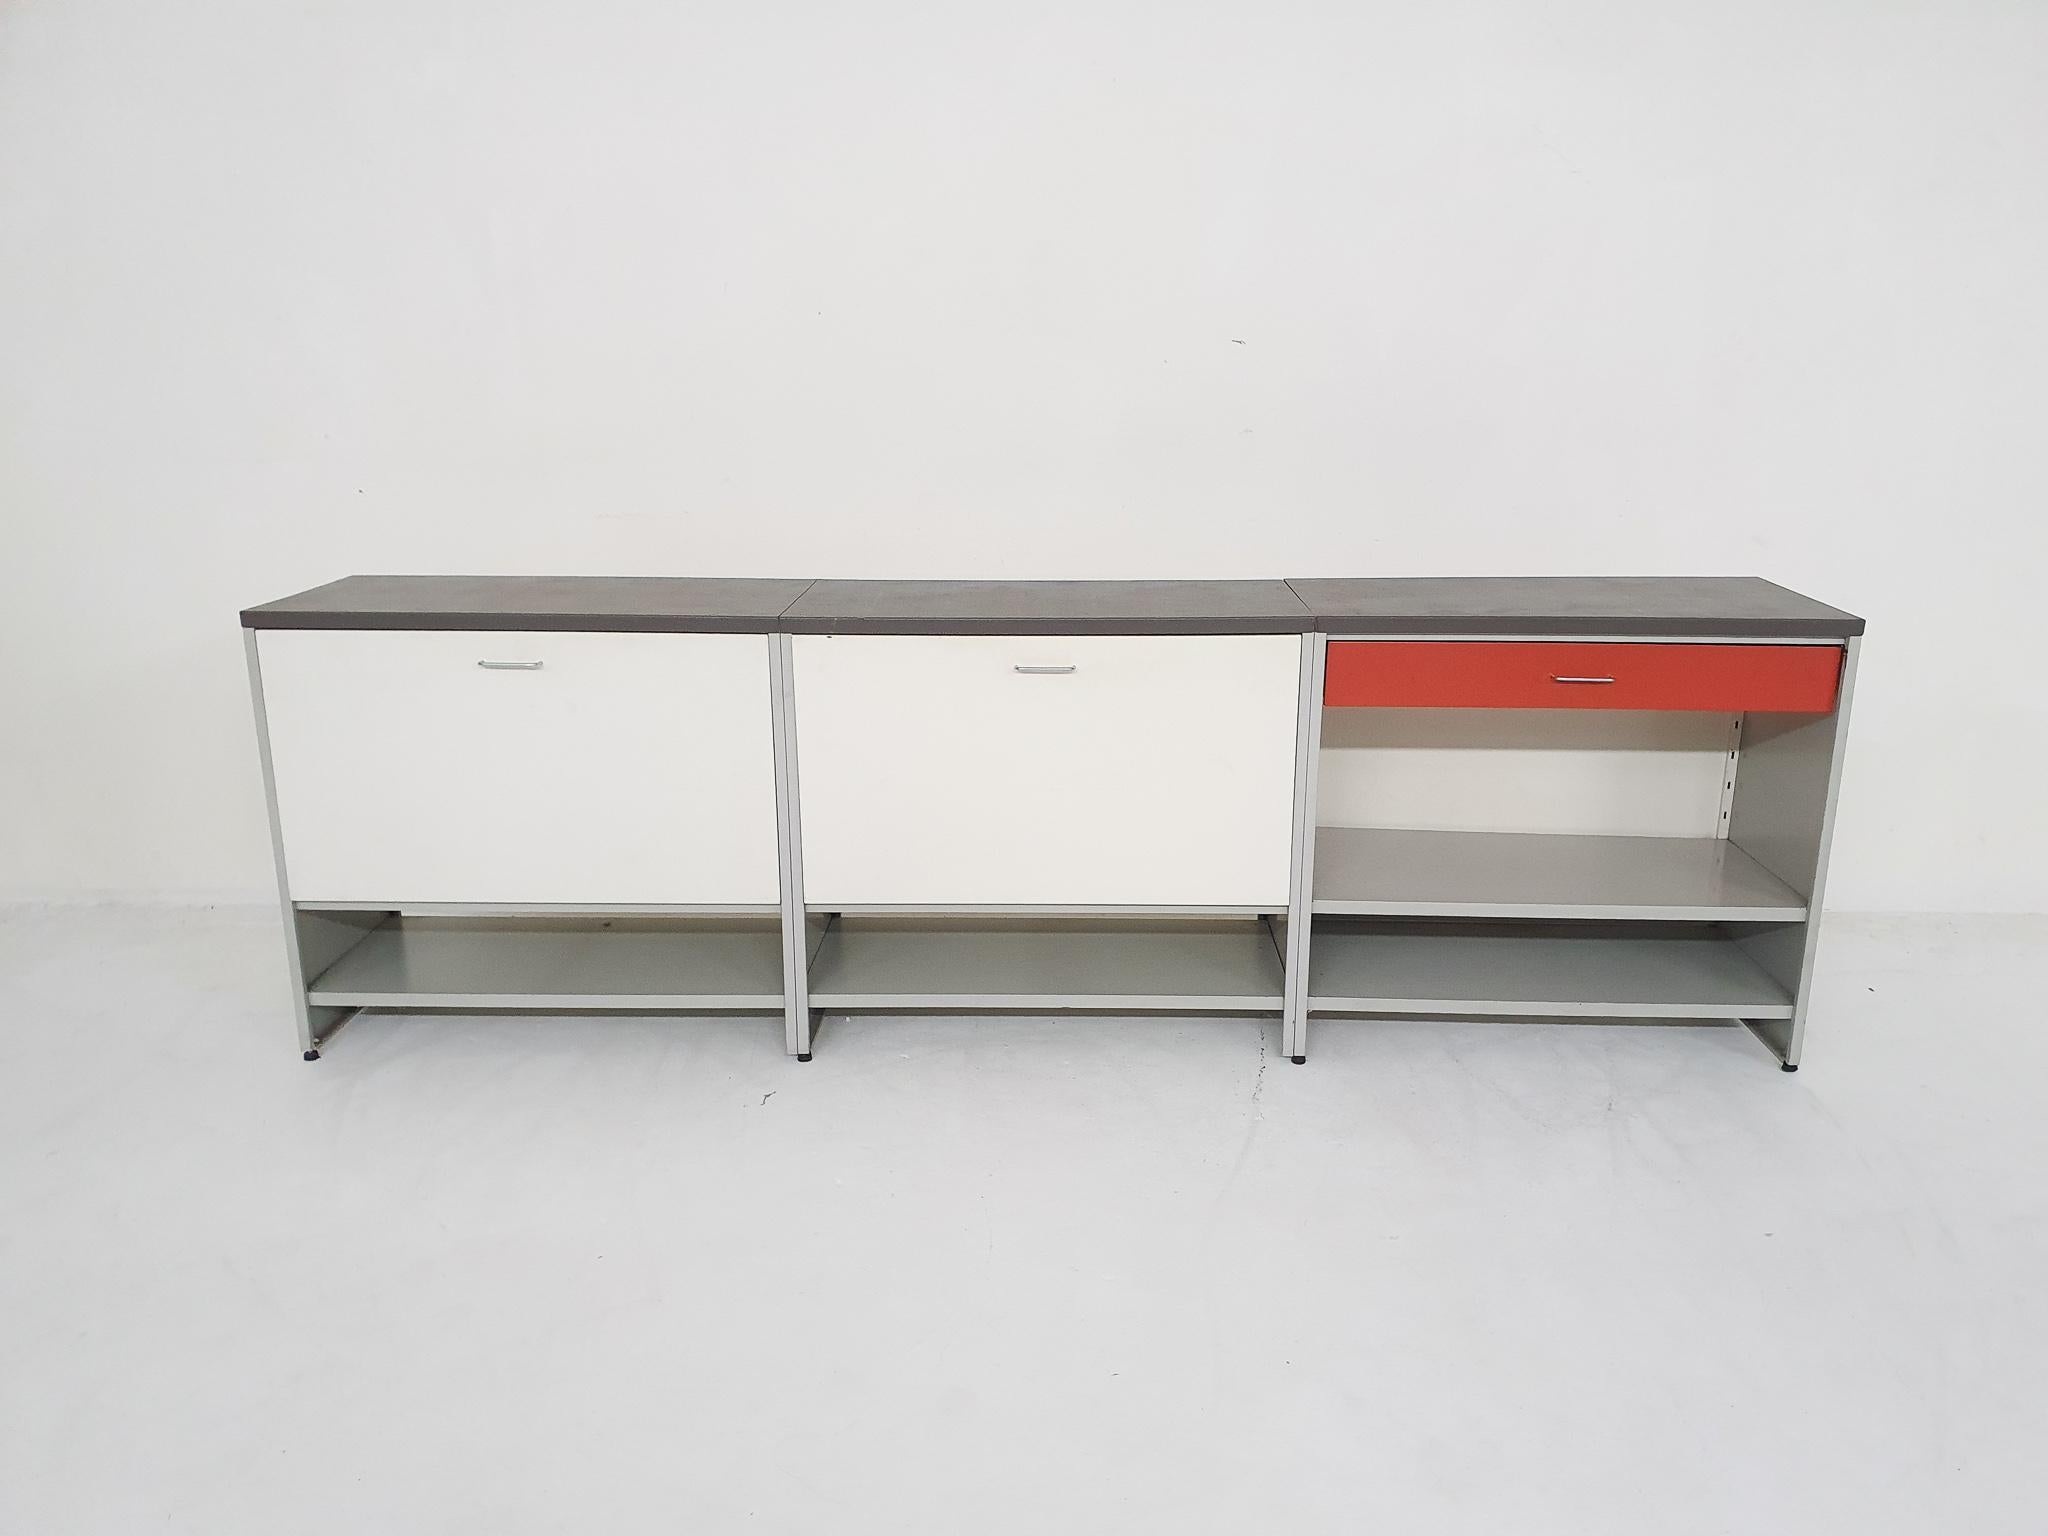 Dutch Sideboard by A.R. Cordemeyer for Gispen, model 5600, The Netherlands, 1962